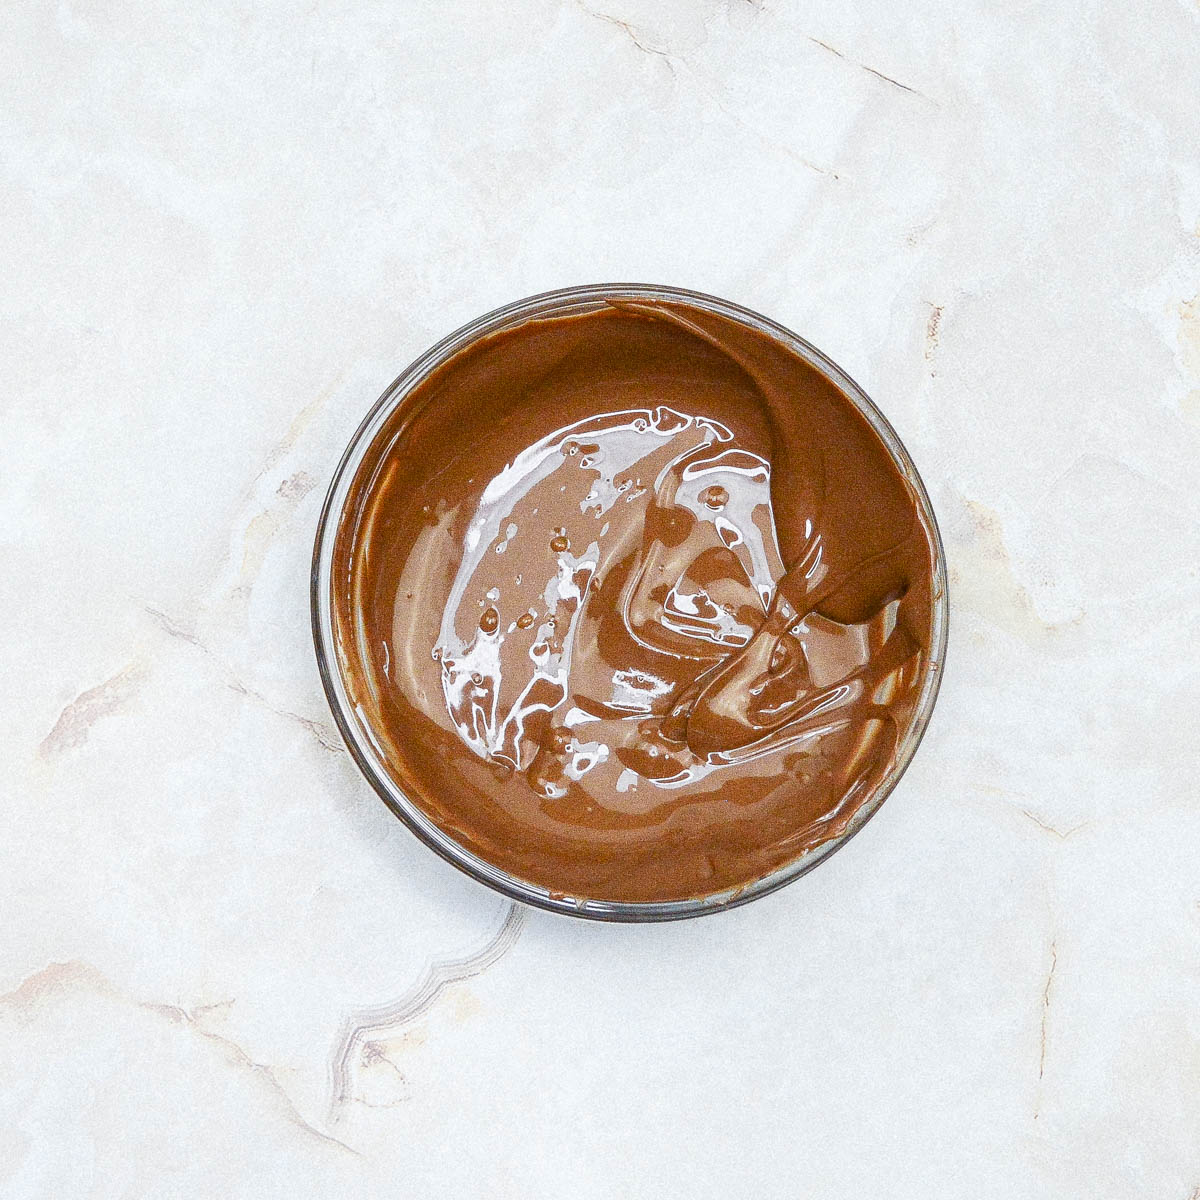 A bowl of chocolate on a marble surface.